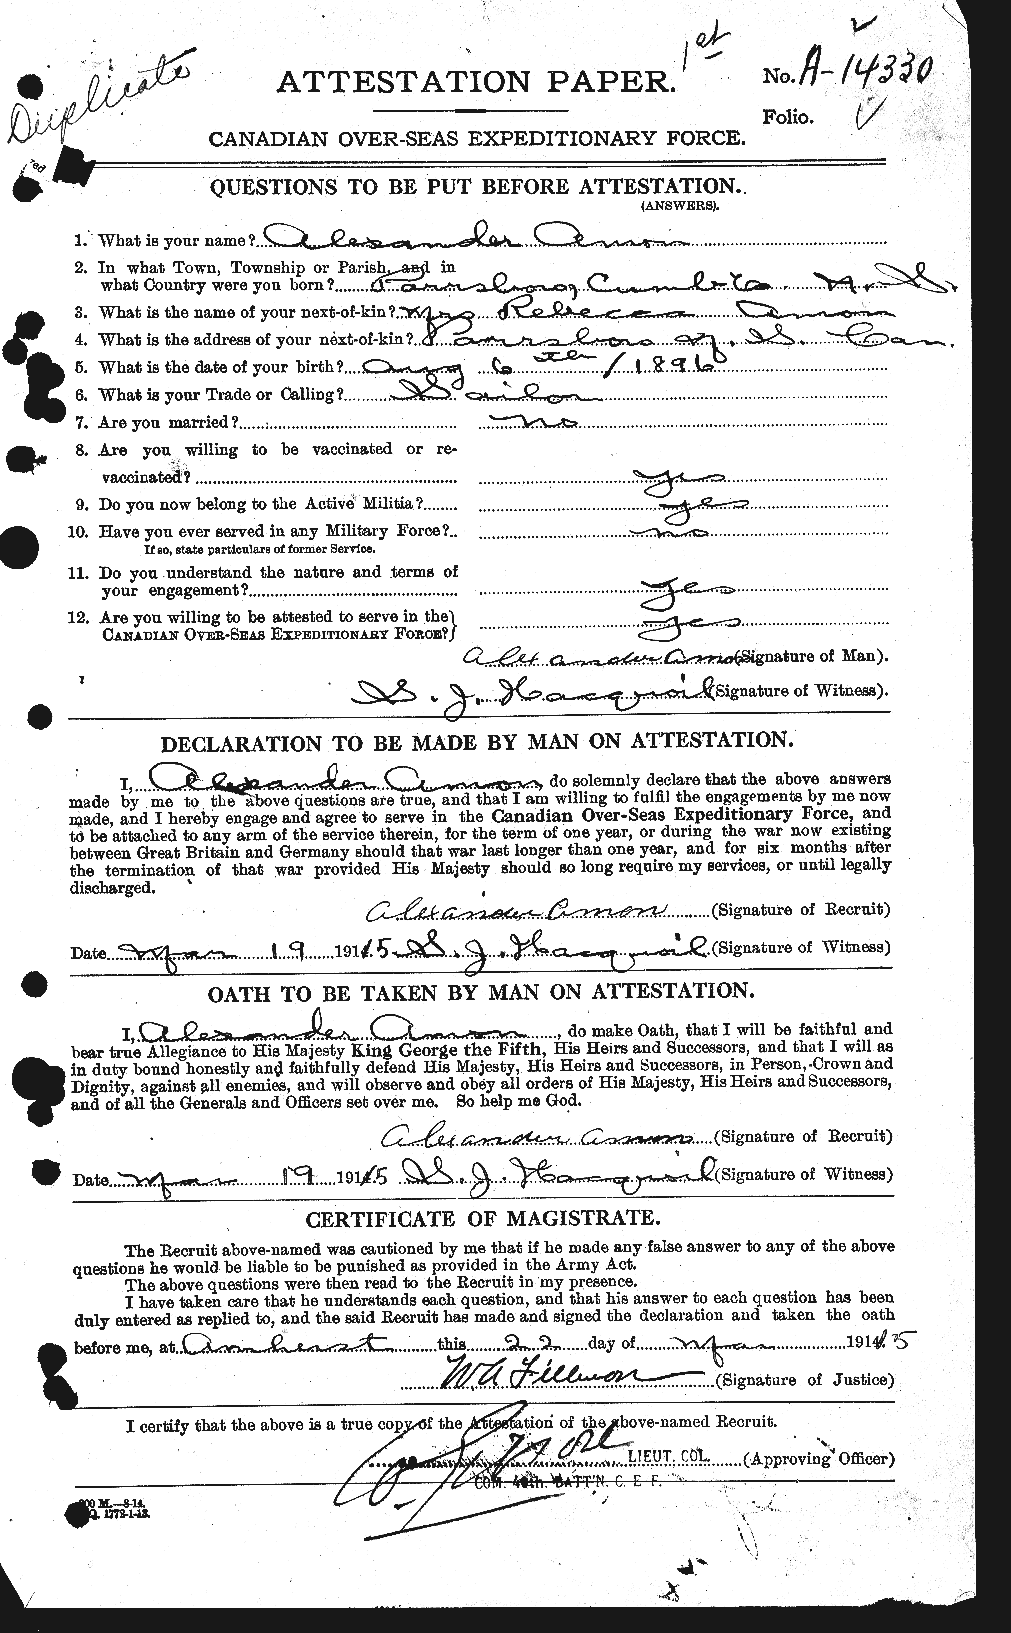 Personnel Records of the First World War - CEF 208702a